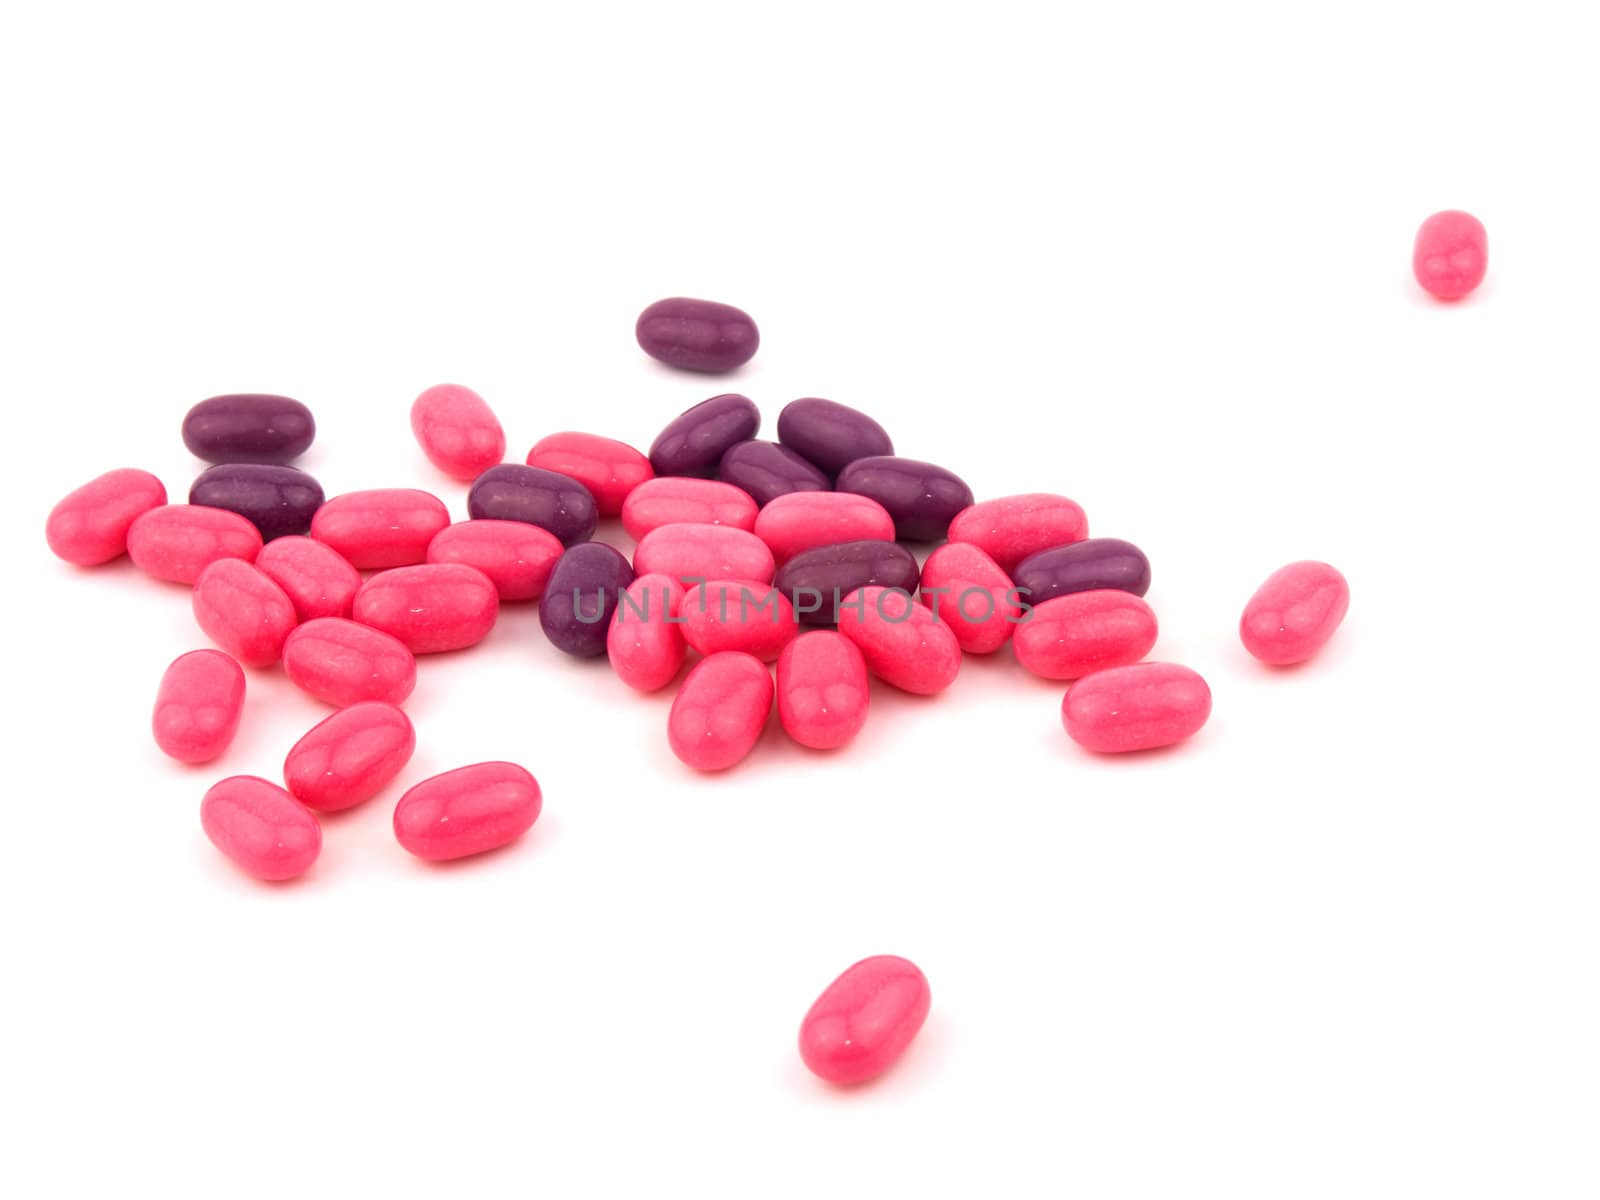 Pink and purple candies on white background